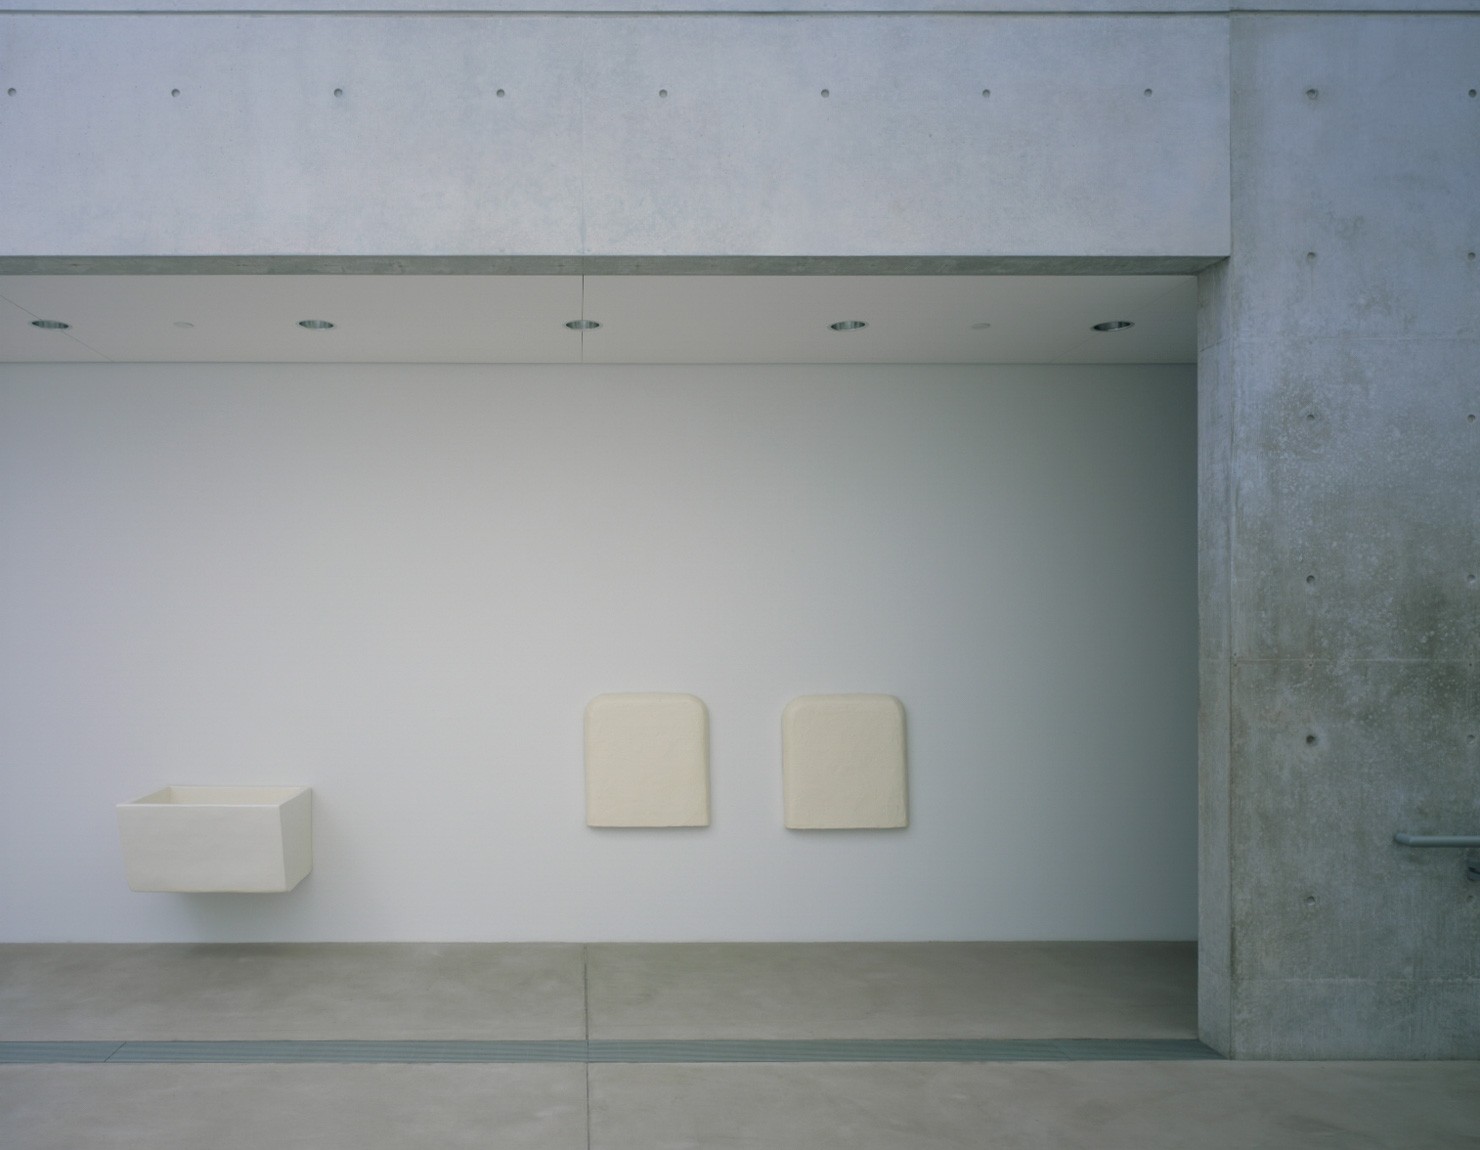 A white hollow box is installed on a wall in the Lower-Main Gallery. Two white squares hang on the wall beside it.